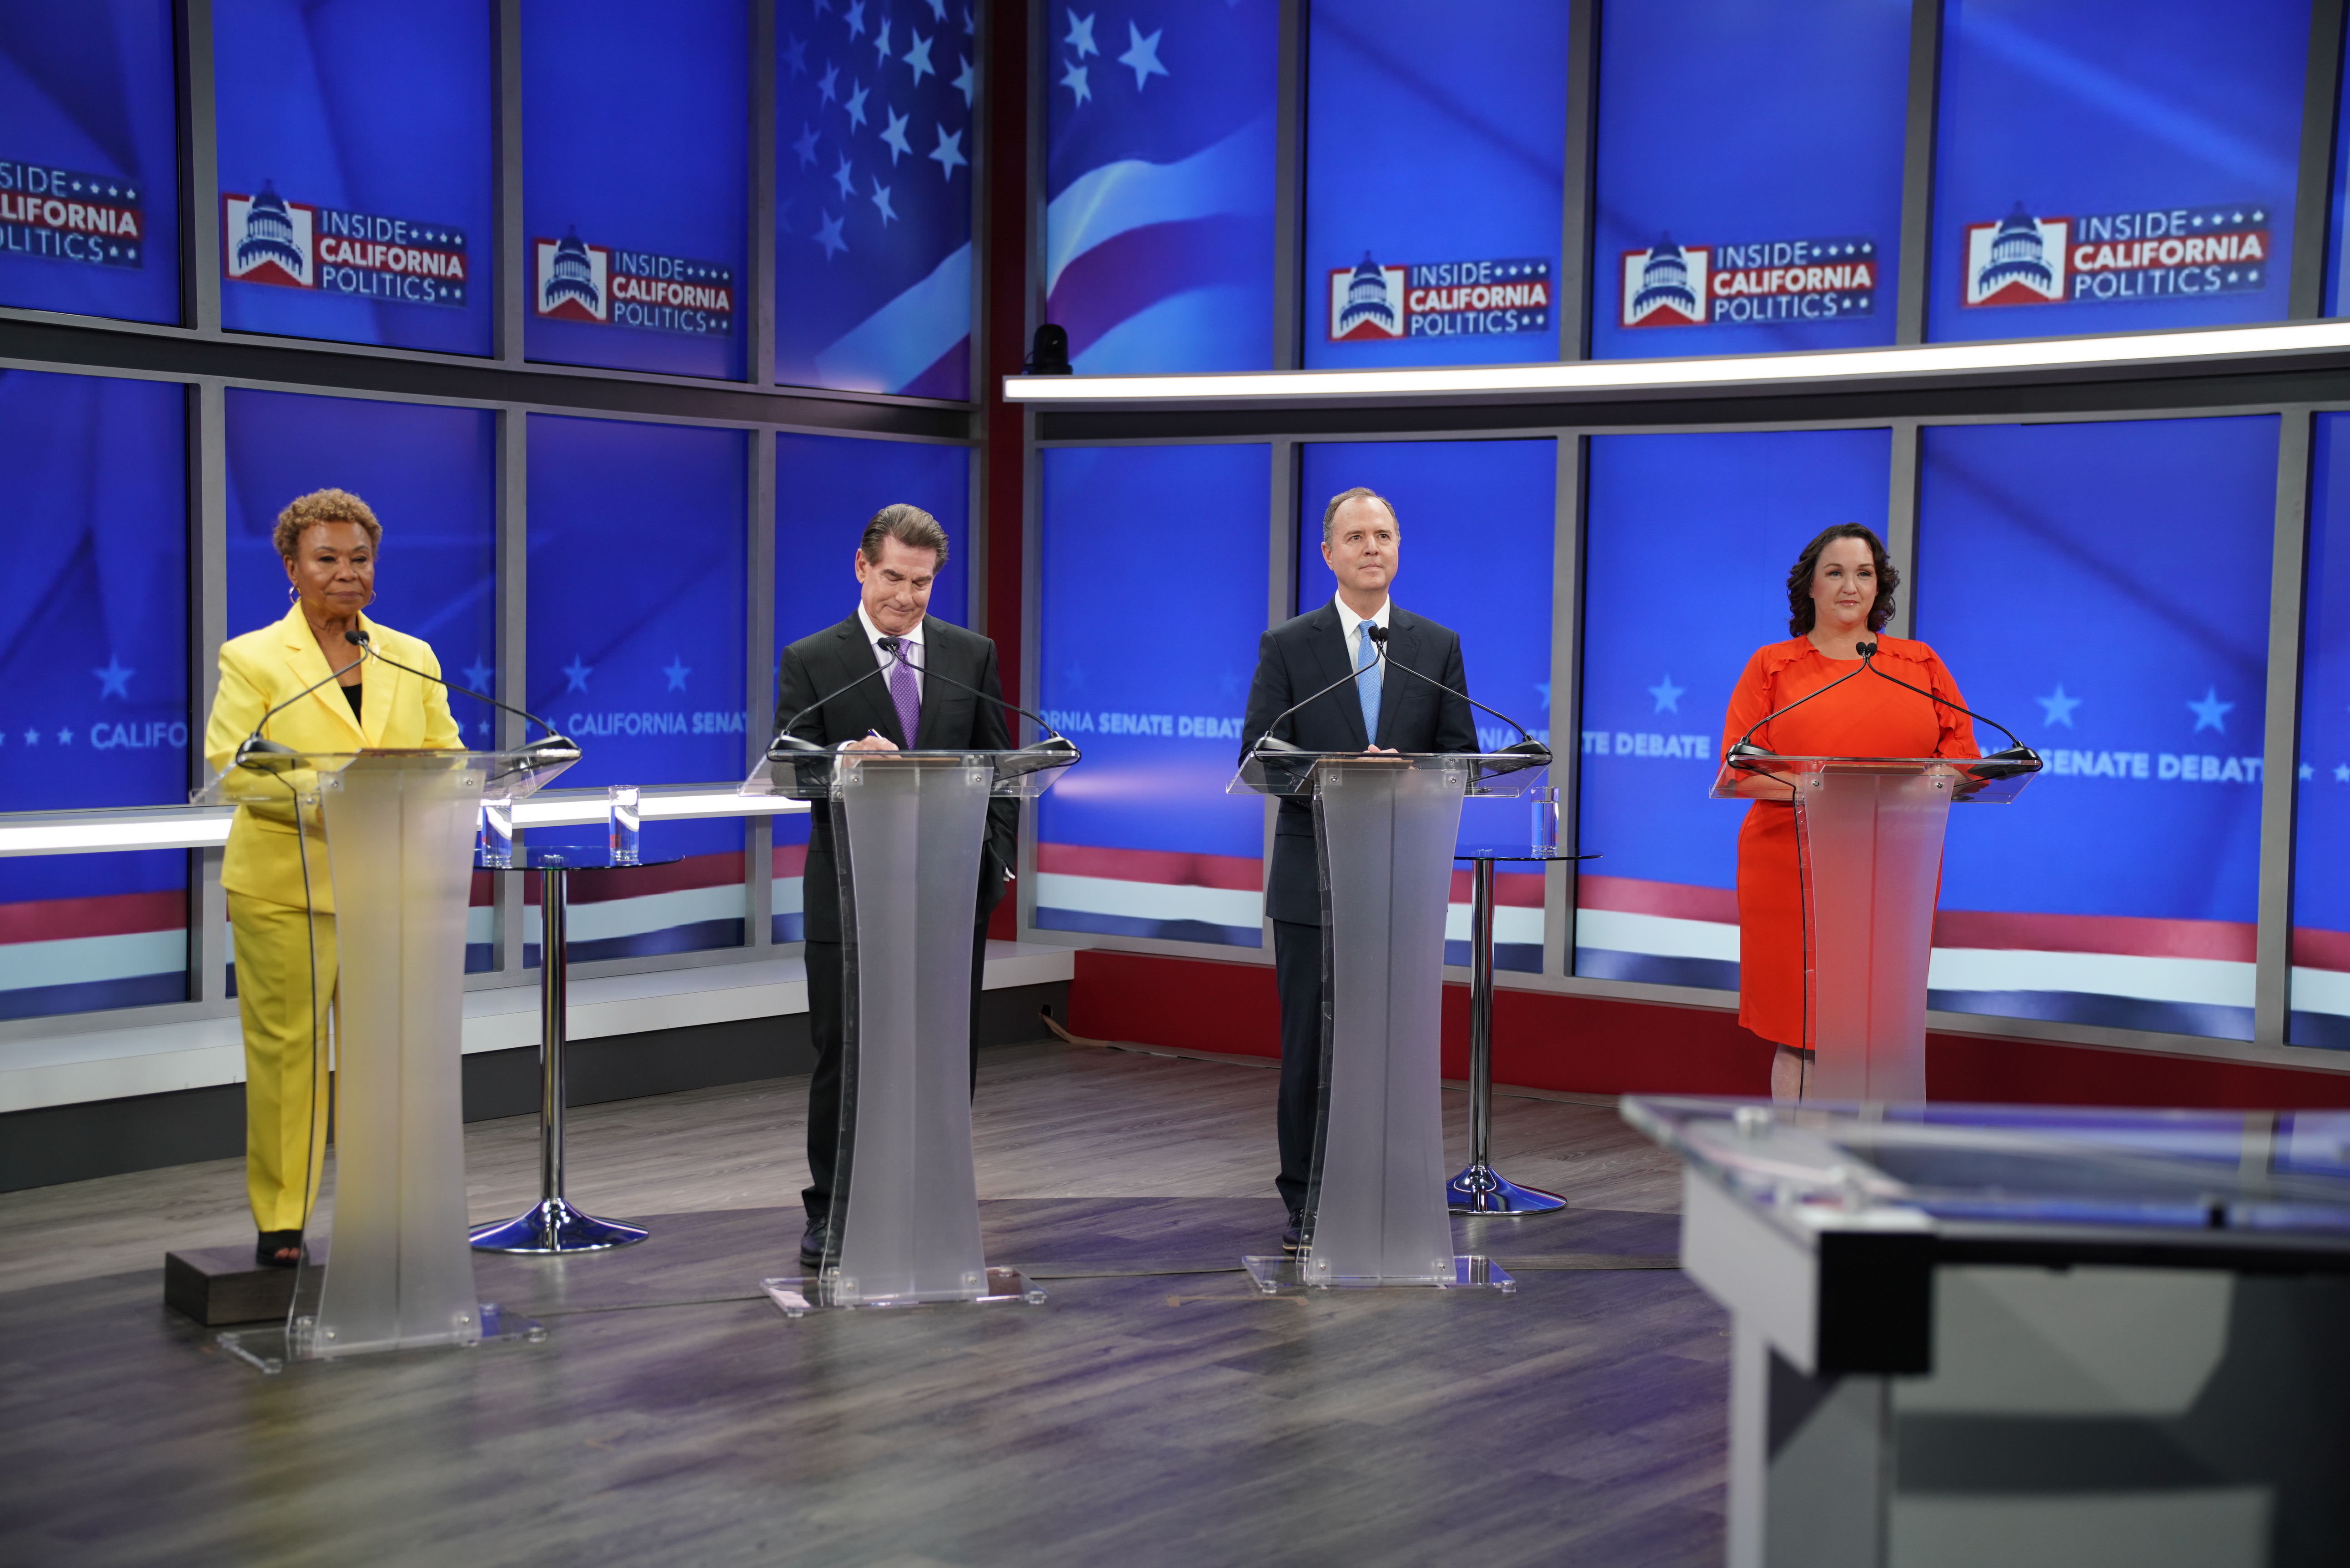 The four candidates for California's U.S. Senate seat sparred during a debate hosted by Nexstar and Inside California Politics on Feb. 12, 2024. (Nexstar)